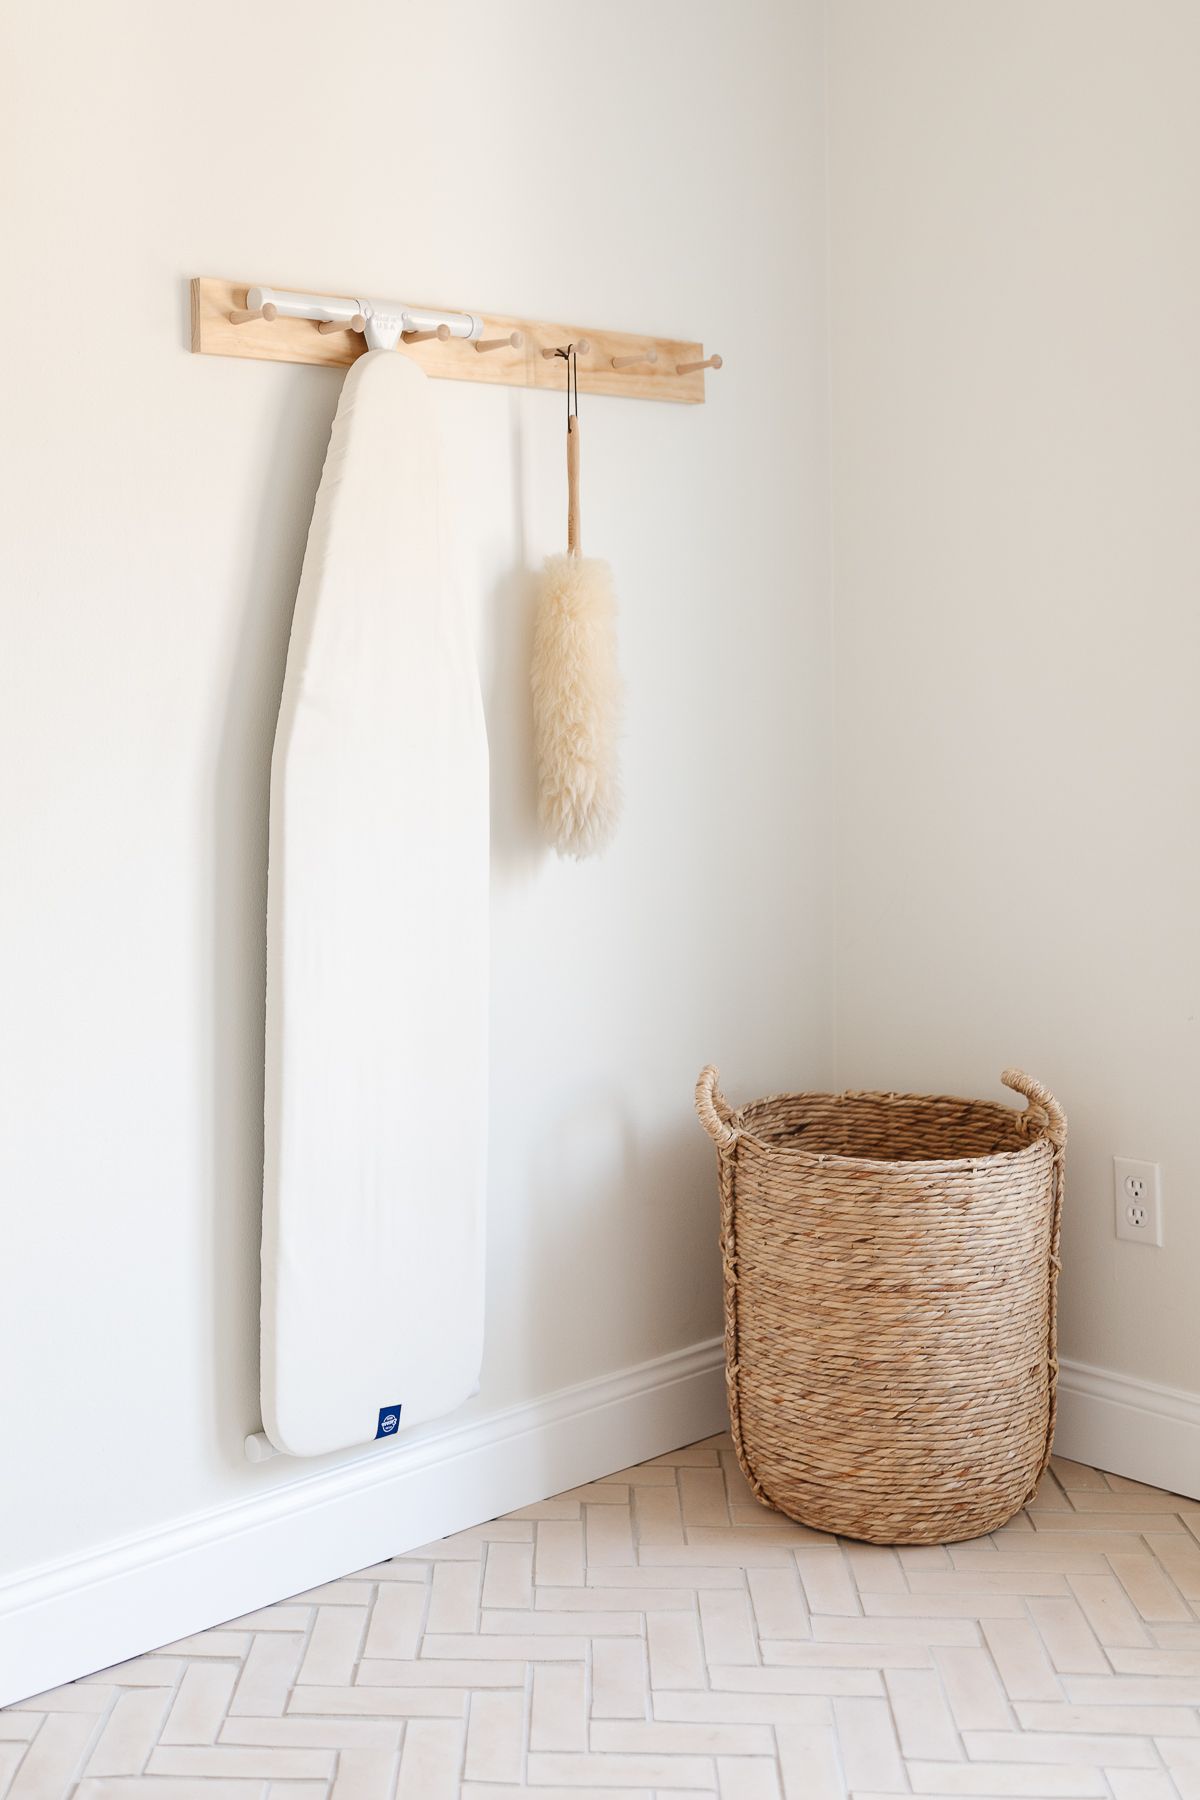 A laundry room with a peg rail holding an ironing board, basket in the corner